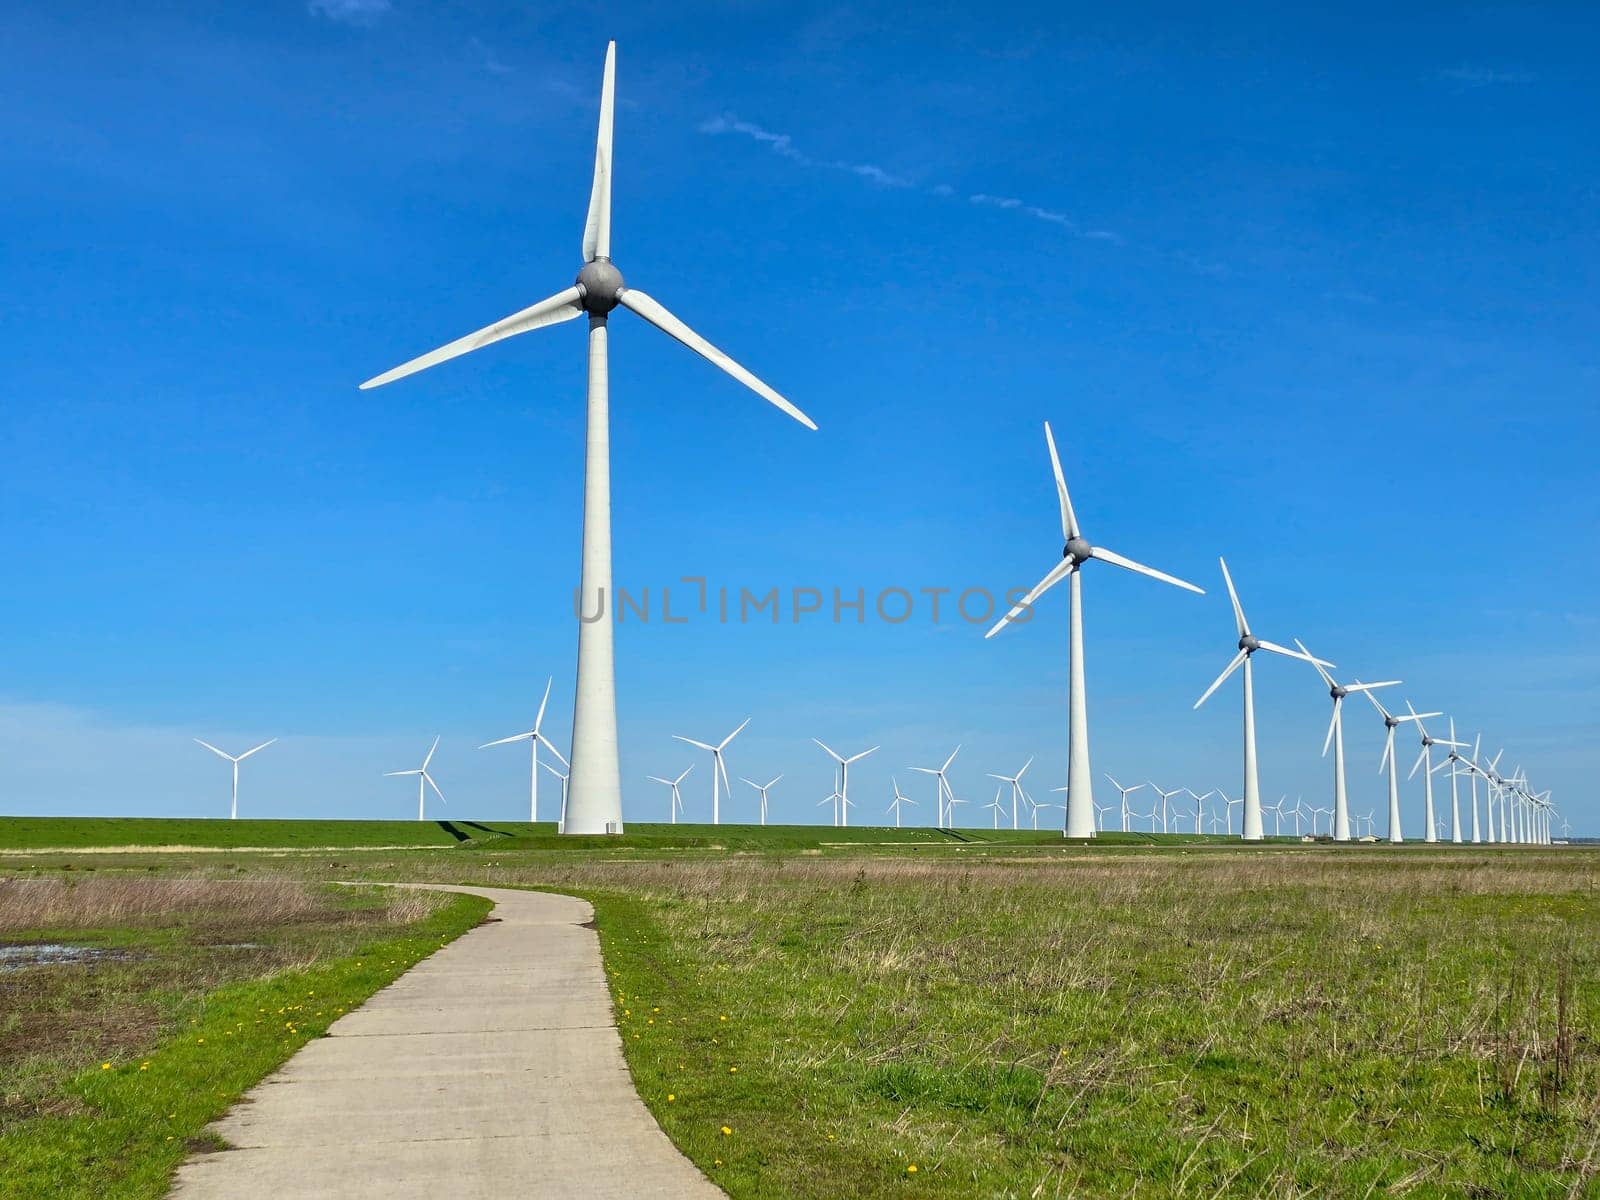 Windmill park in the ocean, view of windmill turbines on a Dutch dike generating green energy electrically, windmills isolated at sea in the Netherlands.